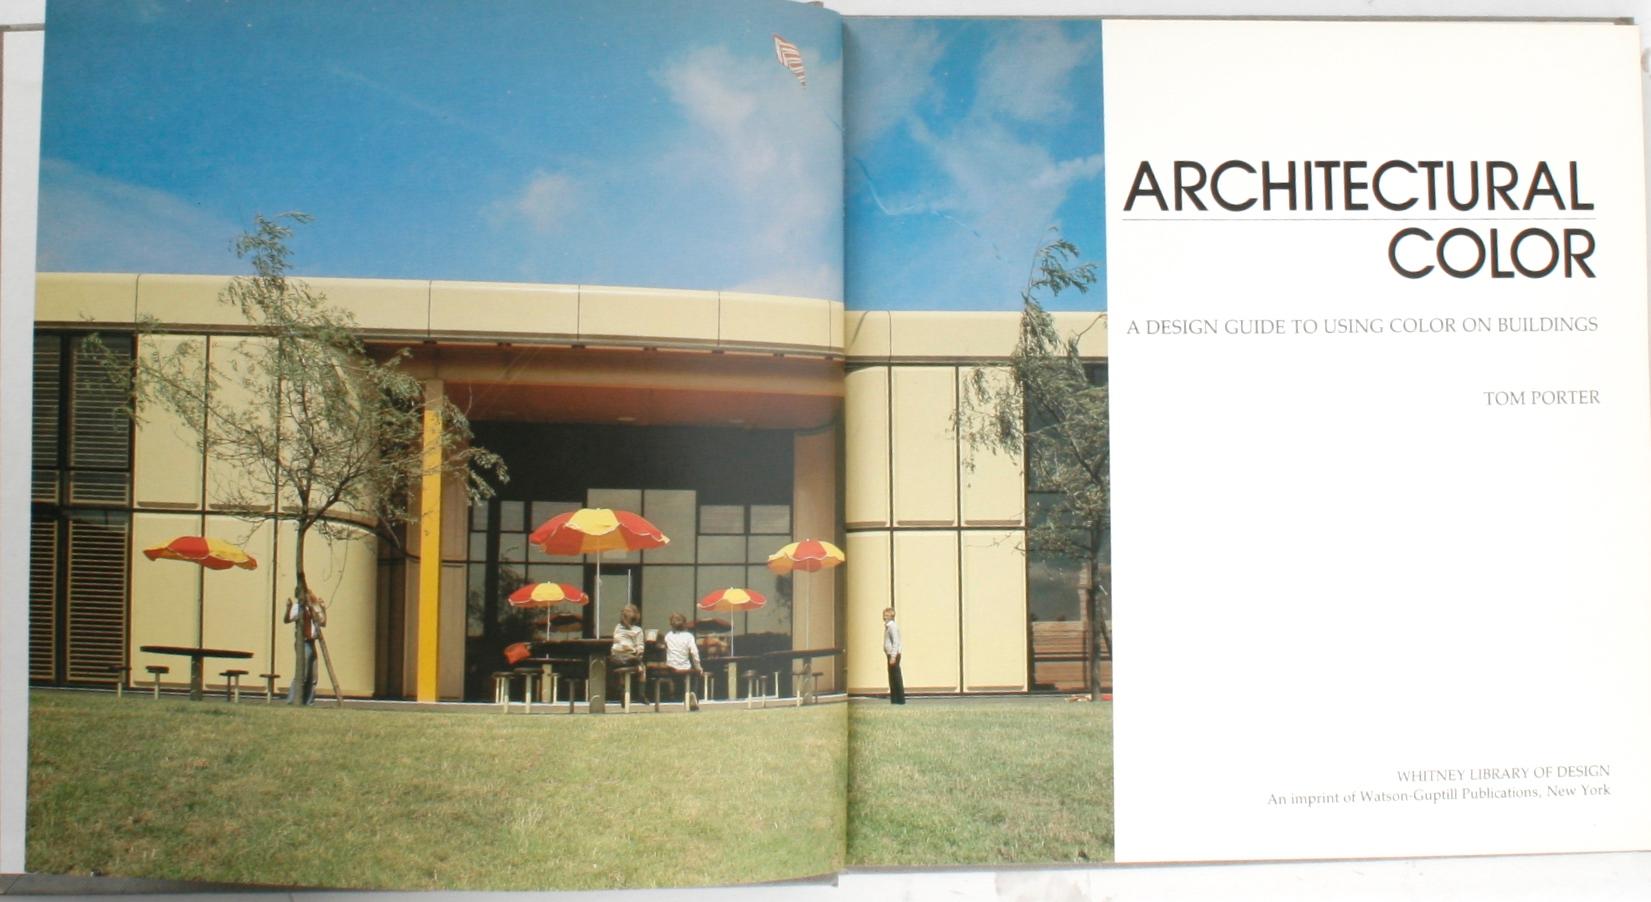 Architectural Color: A Design Guide to Using Color on Buildings by Tom Porter. Whitney Library of Design, 1982. Stated First Printing, 1st Ed hardcover, no dust jacket. This book serves as a comprehensive professional color guide. It first tracks